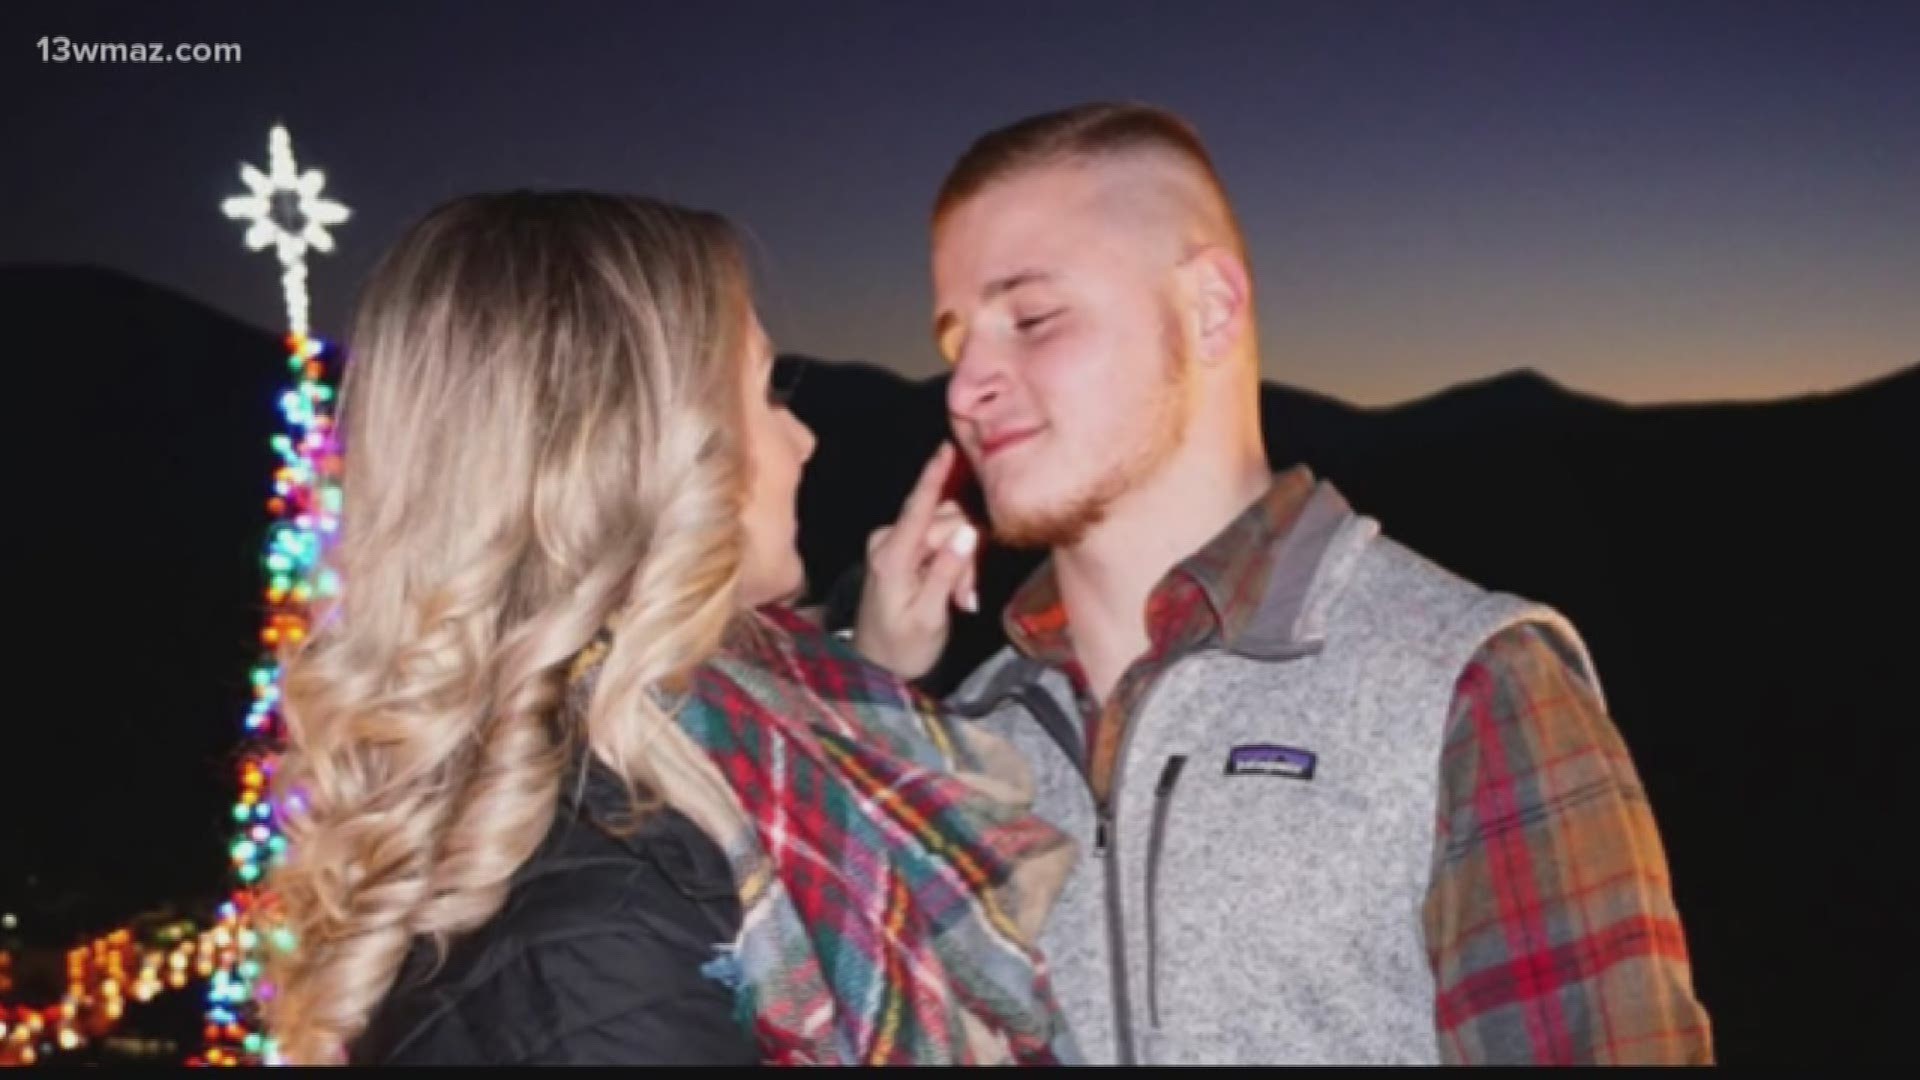 Middle Georgia State University nursing students Colbi McDaniels and Sarah Cornell got engaged last month, the most popular time for engagements in America.